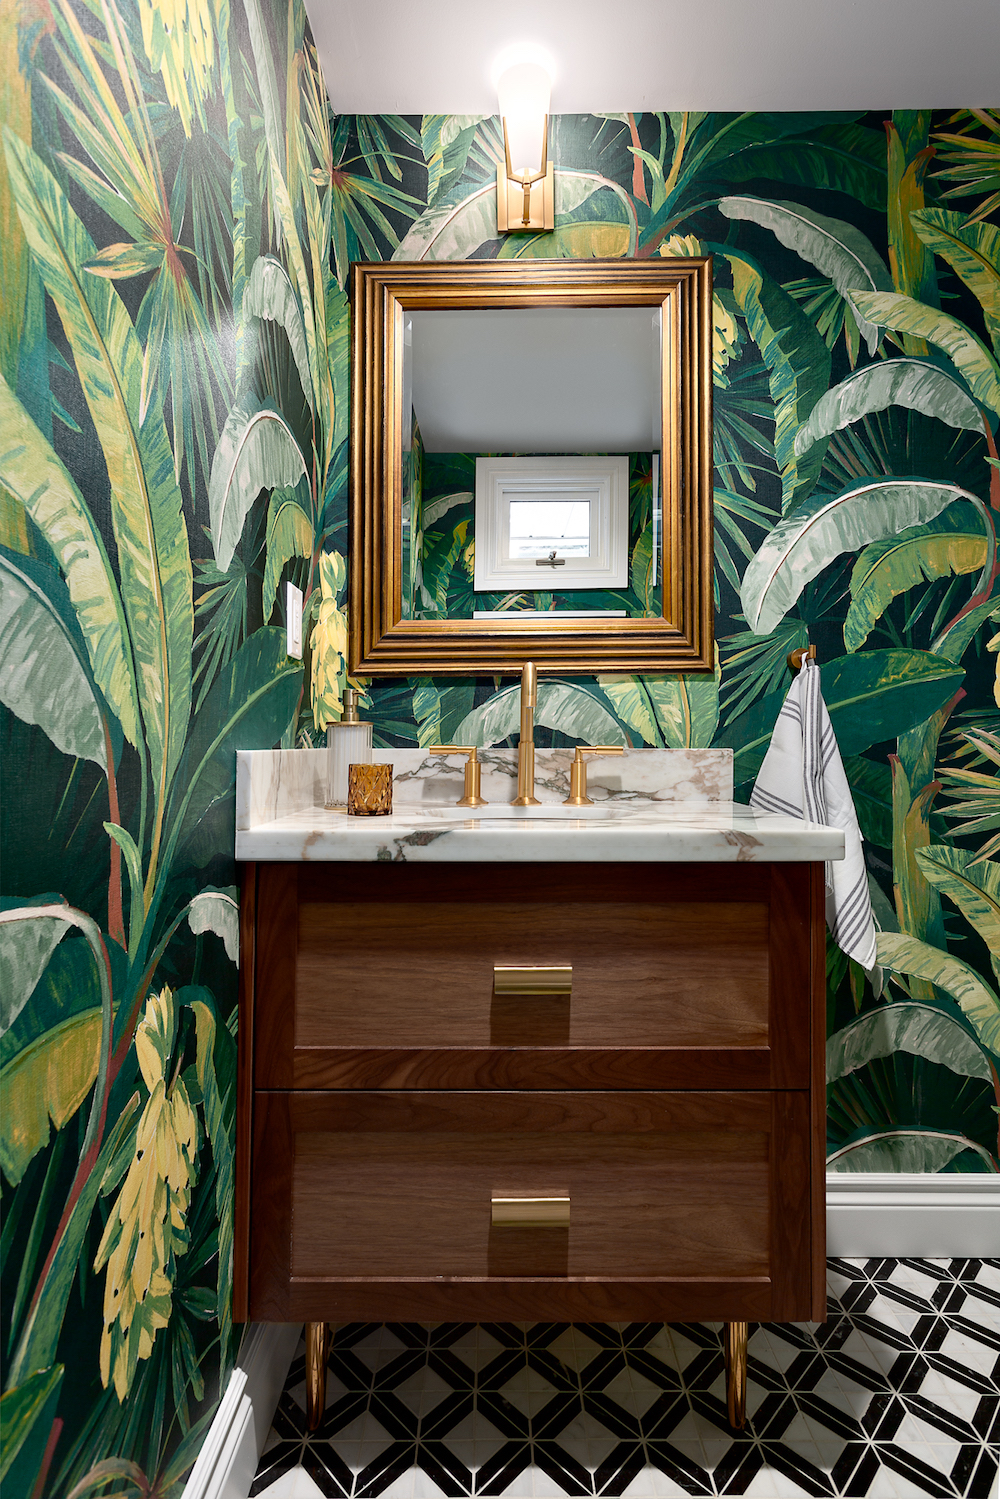 13 Bathroom Wallpaper Ideas That'll Inspire You to Go Bright and Bold -  HGTV Canada